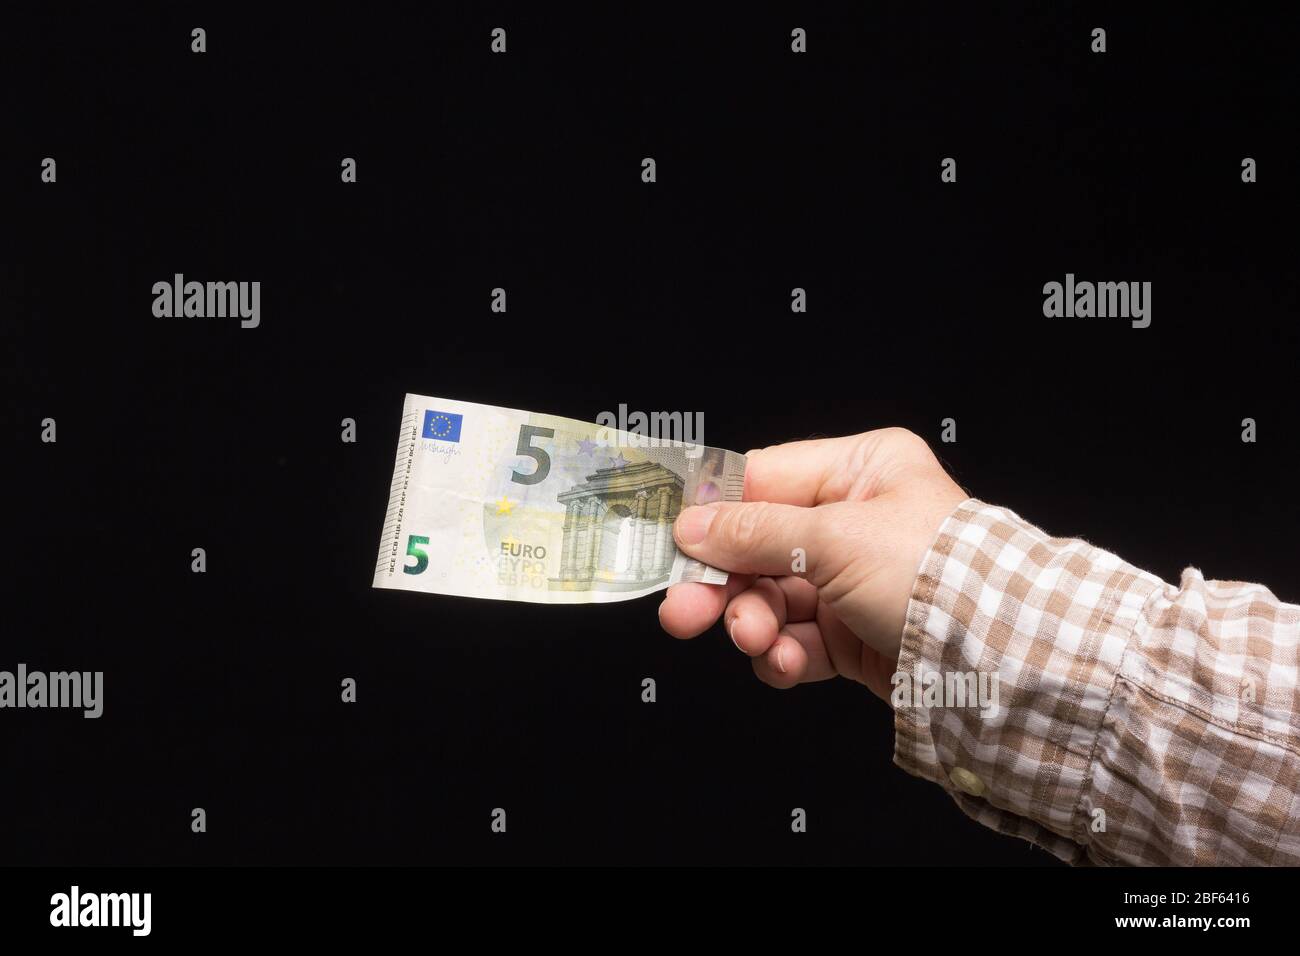 Wad of euro banknotes in the hand of a person, prepared to buy or to save and enter the bank. Banknotes of legal tender, European currency. Stock Photo